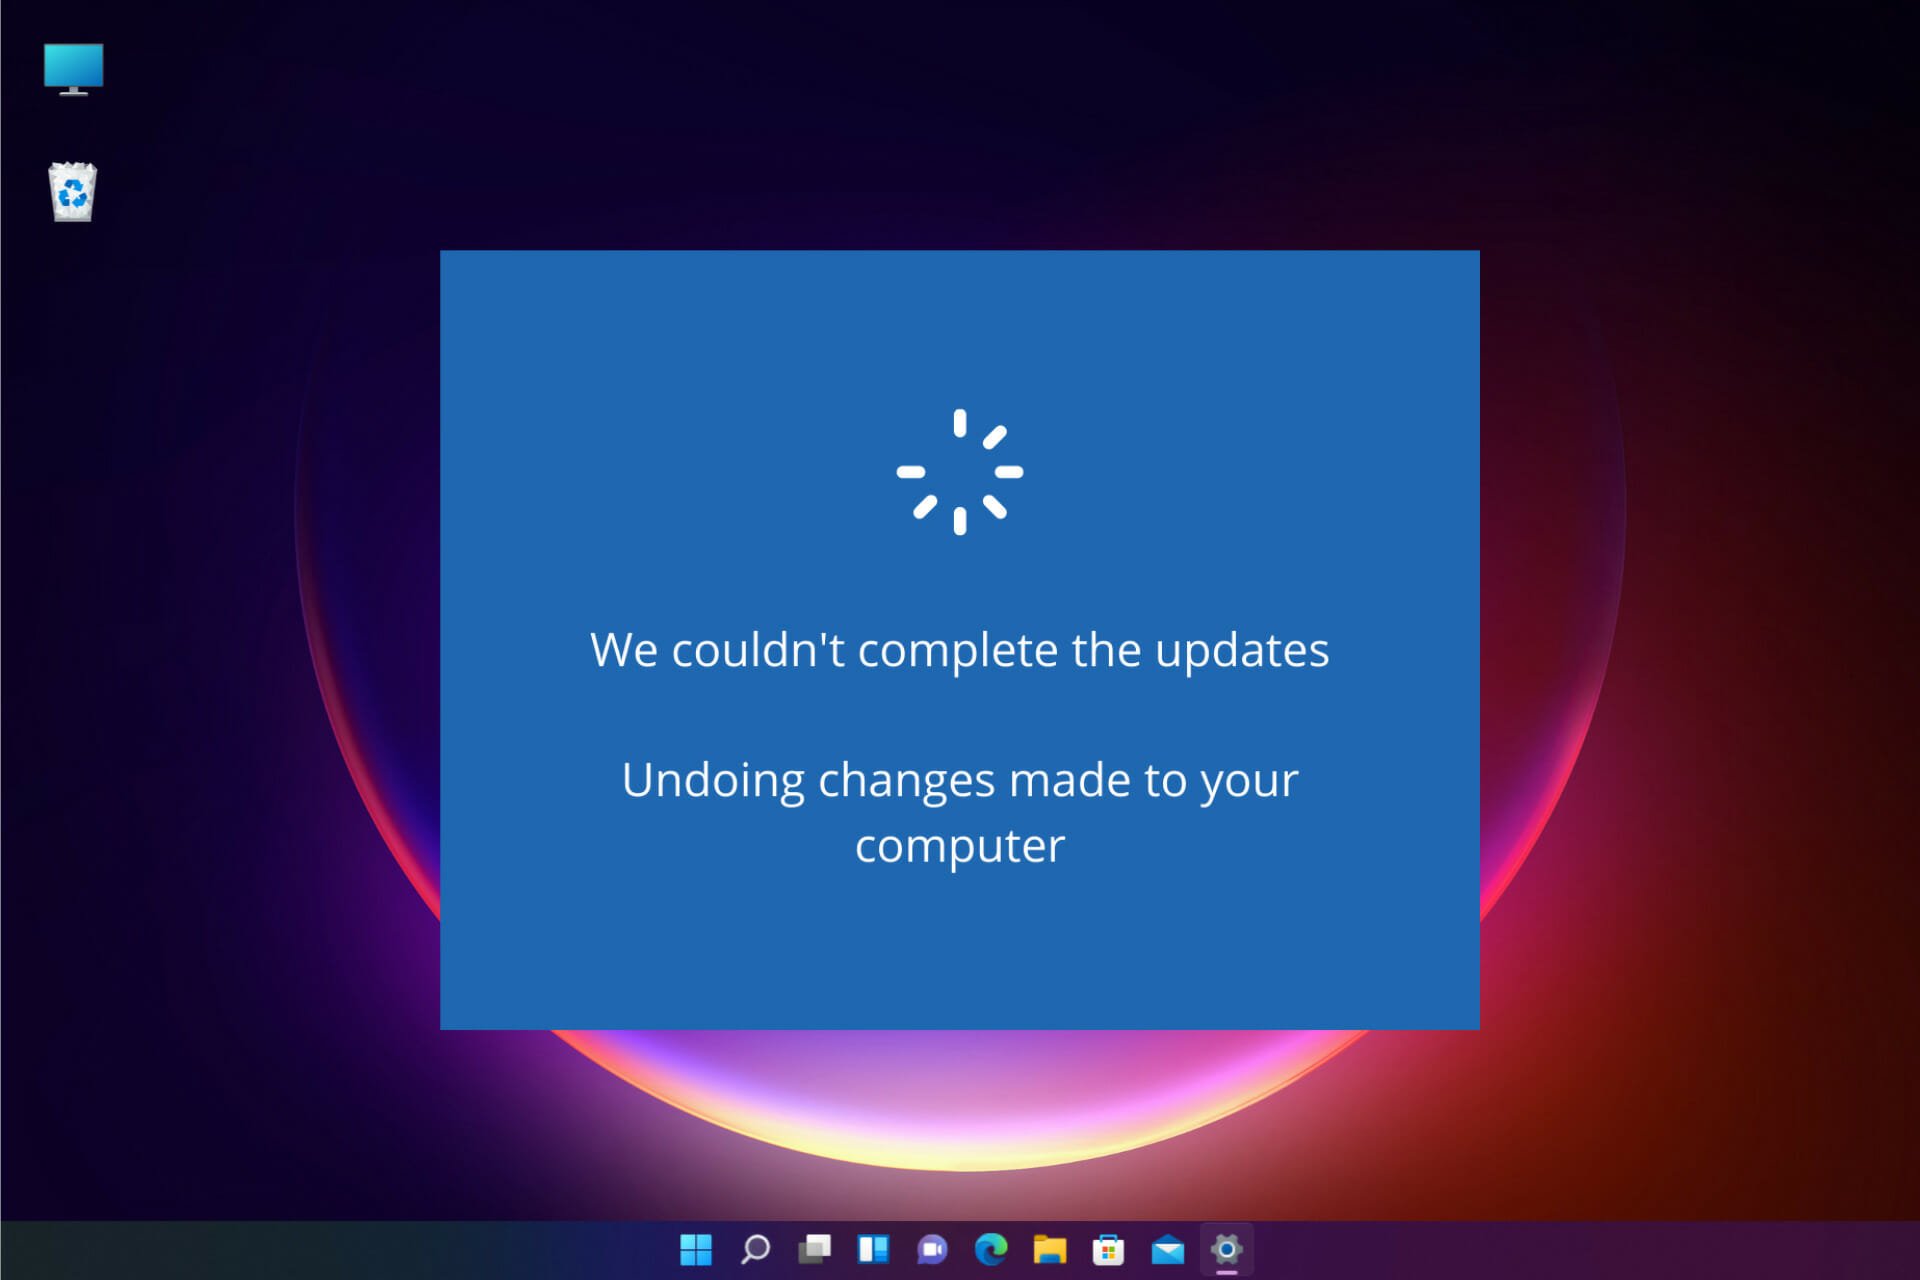 How to fix undoing changes made to your computer Windows 11